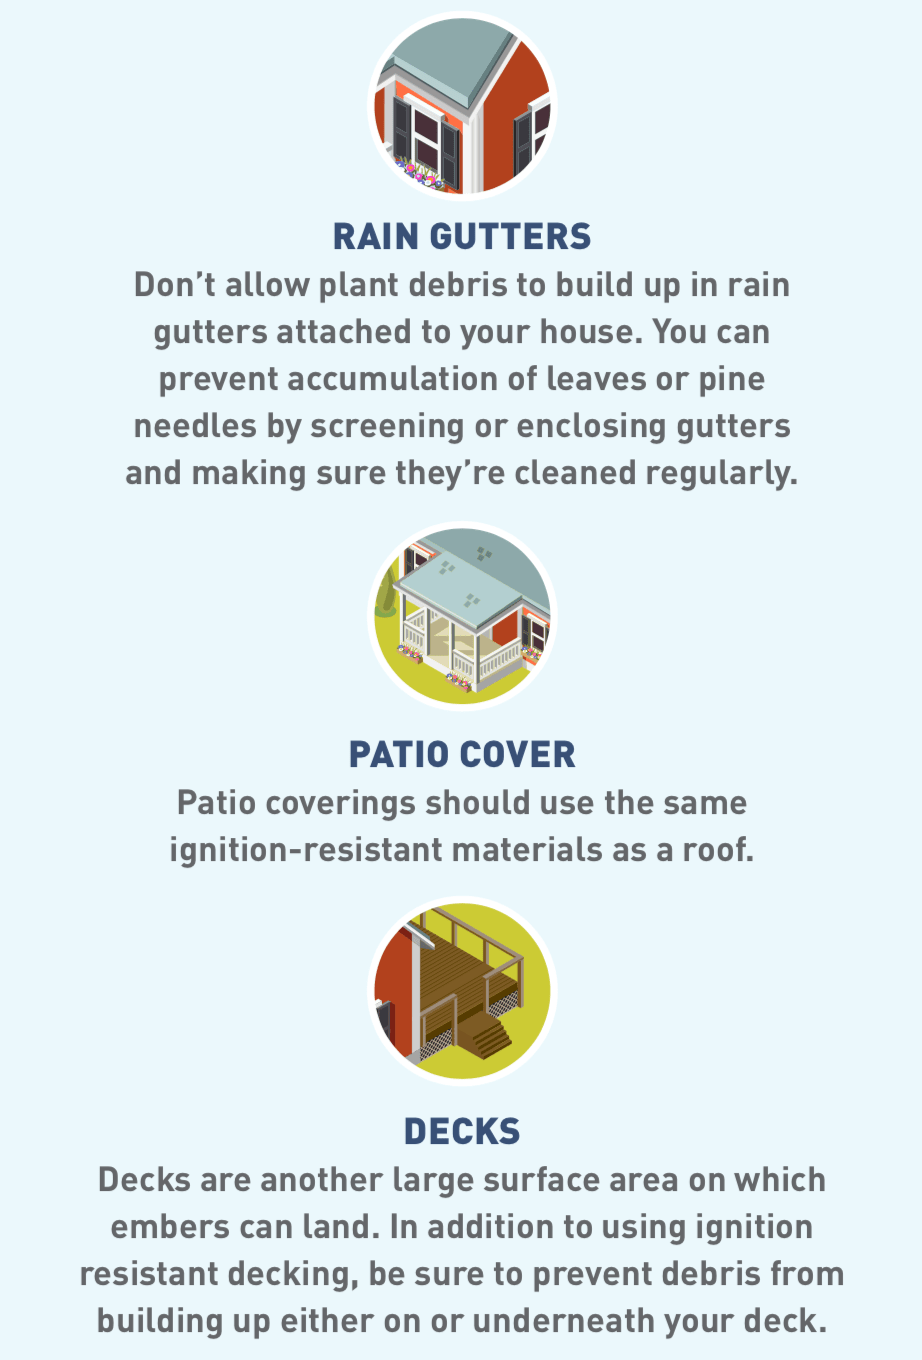 Rain gutters—Don’t allow plant debris to build up in rain gutters attached to your house. You can prevent accumulation of leaves or pine needles by screening or enclosing gutters and making sure they’re cleaned regularly.     Patio cover—Patio coverings should use the same ignition-resistant materials as a roof.     Decks—Decks are another large surface area on which embers can land. In addition to using ignition resistant decking, be sure to prevent debris from building up either on or underneath your deck.